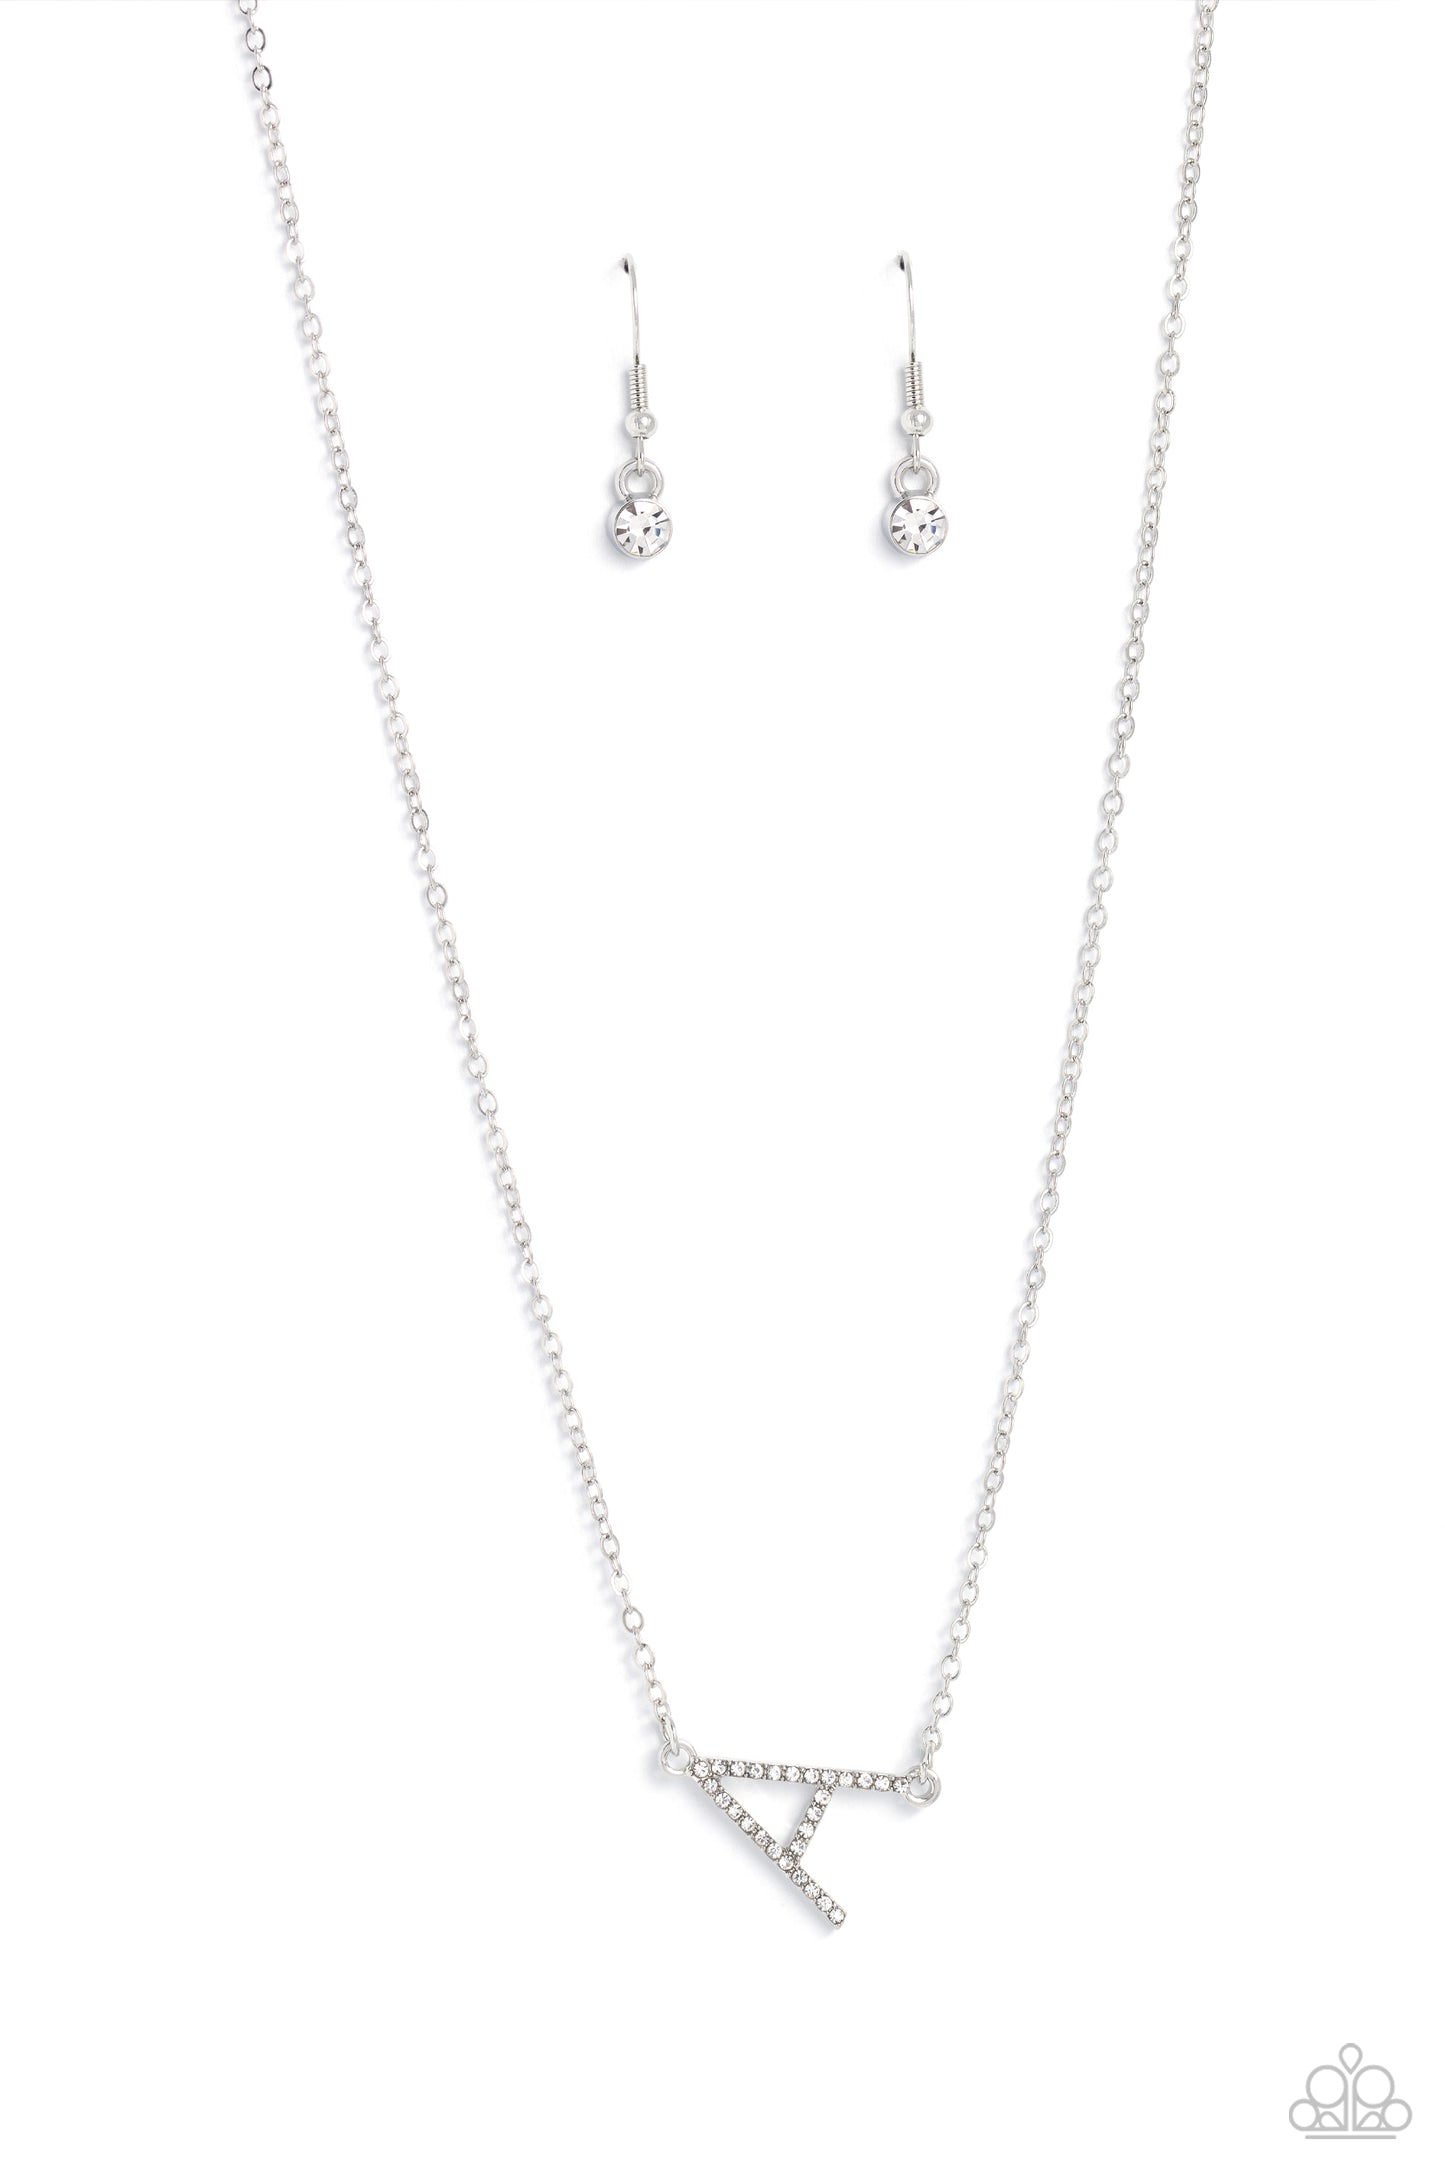 Embossed with dainty white rhinestones, a silver letter "A" hovers below the collar from a dainty silver chain, for a sentimentally simple design. Features an adjustable clasp closure.  Sold as one individual necklace. Includes one pair of matching earrings.